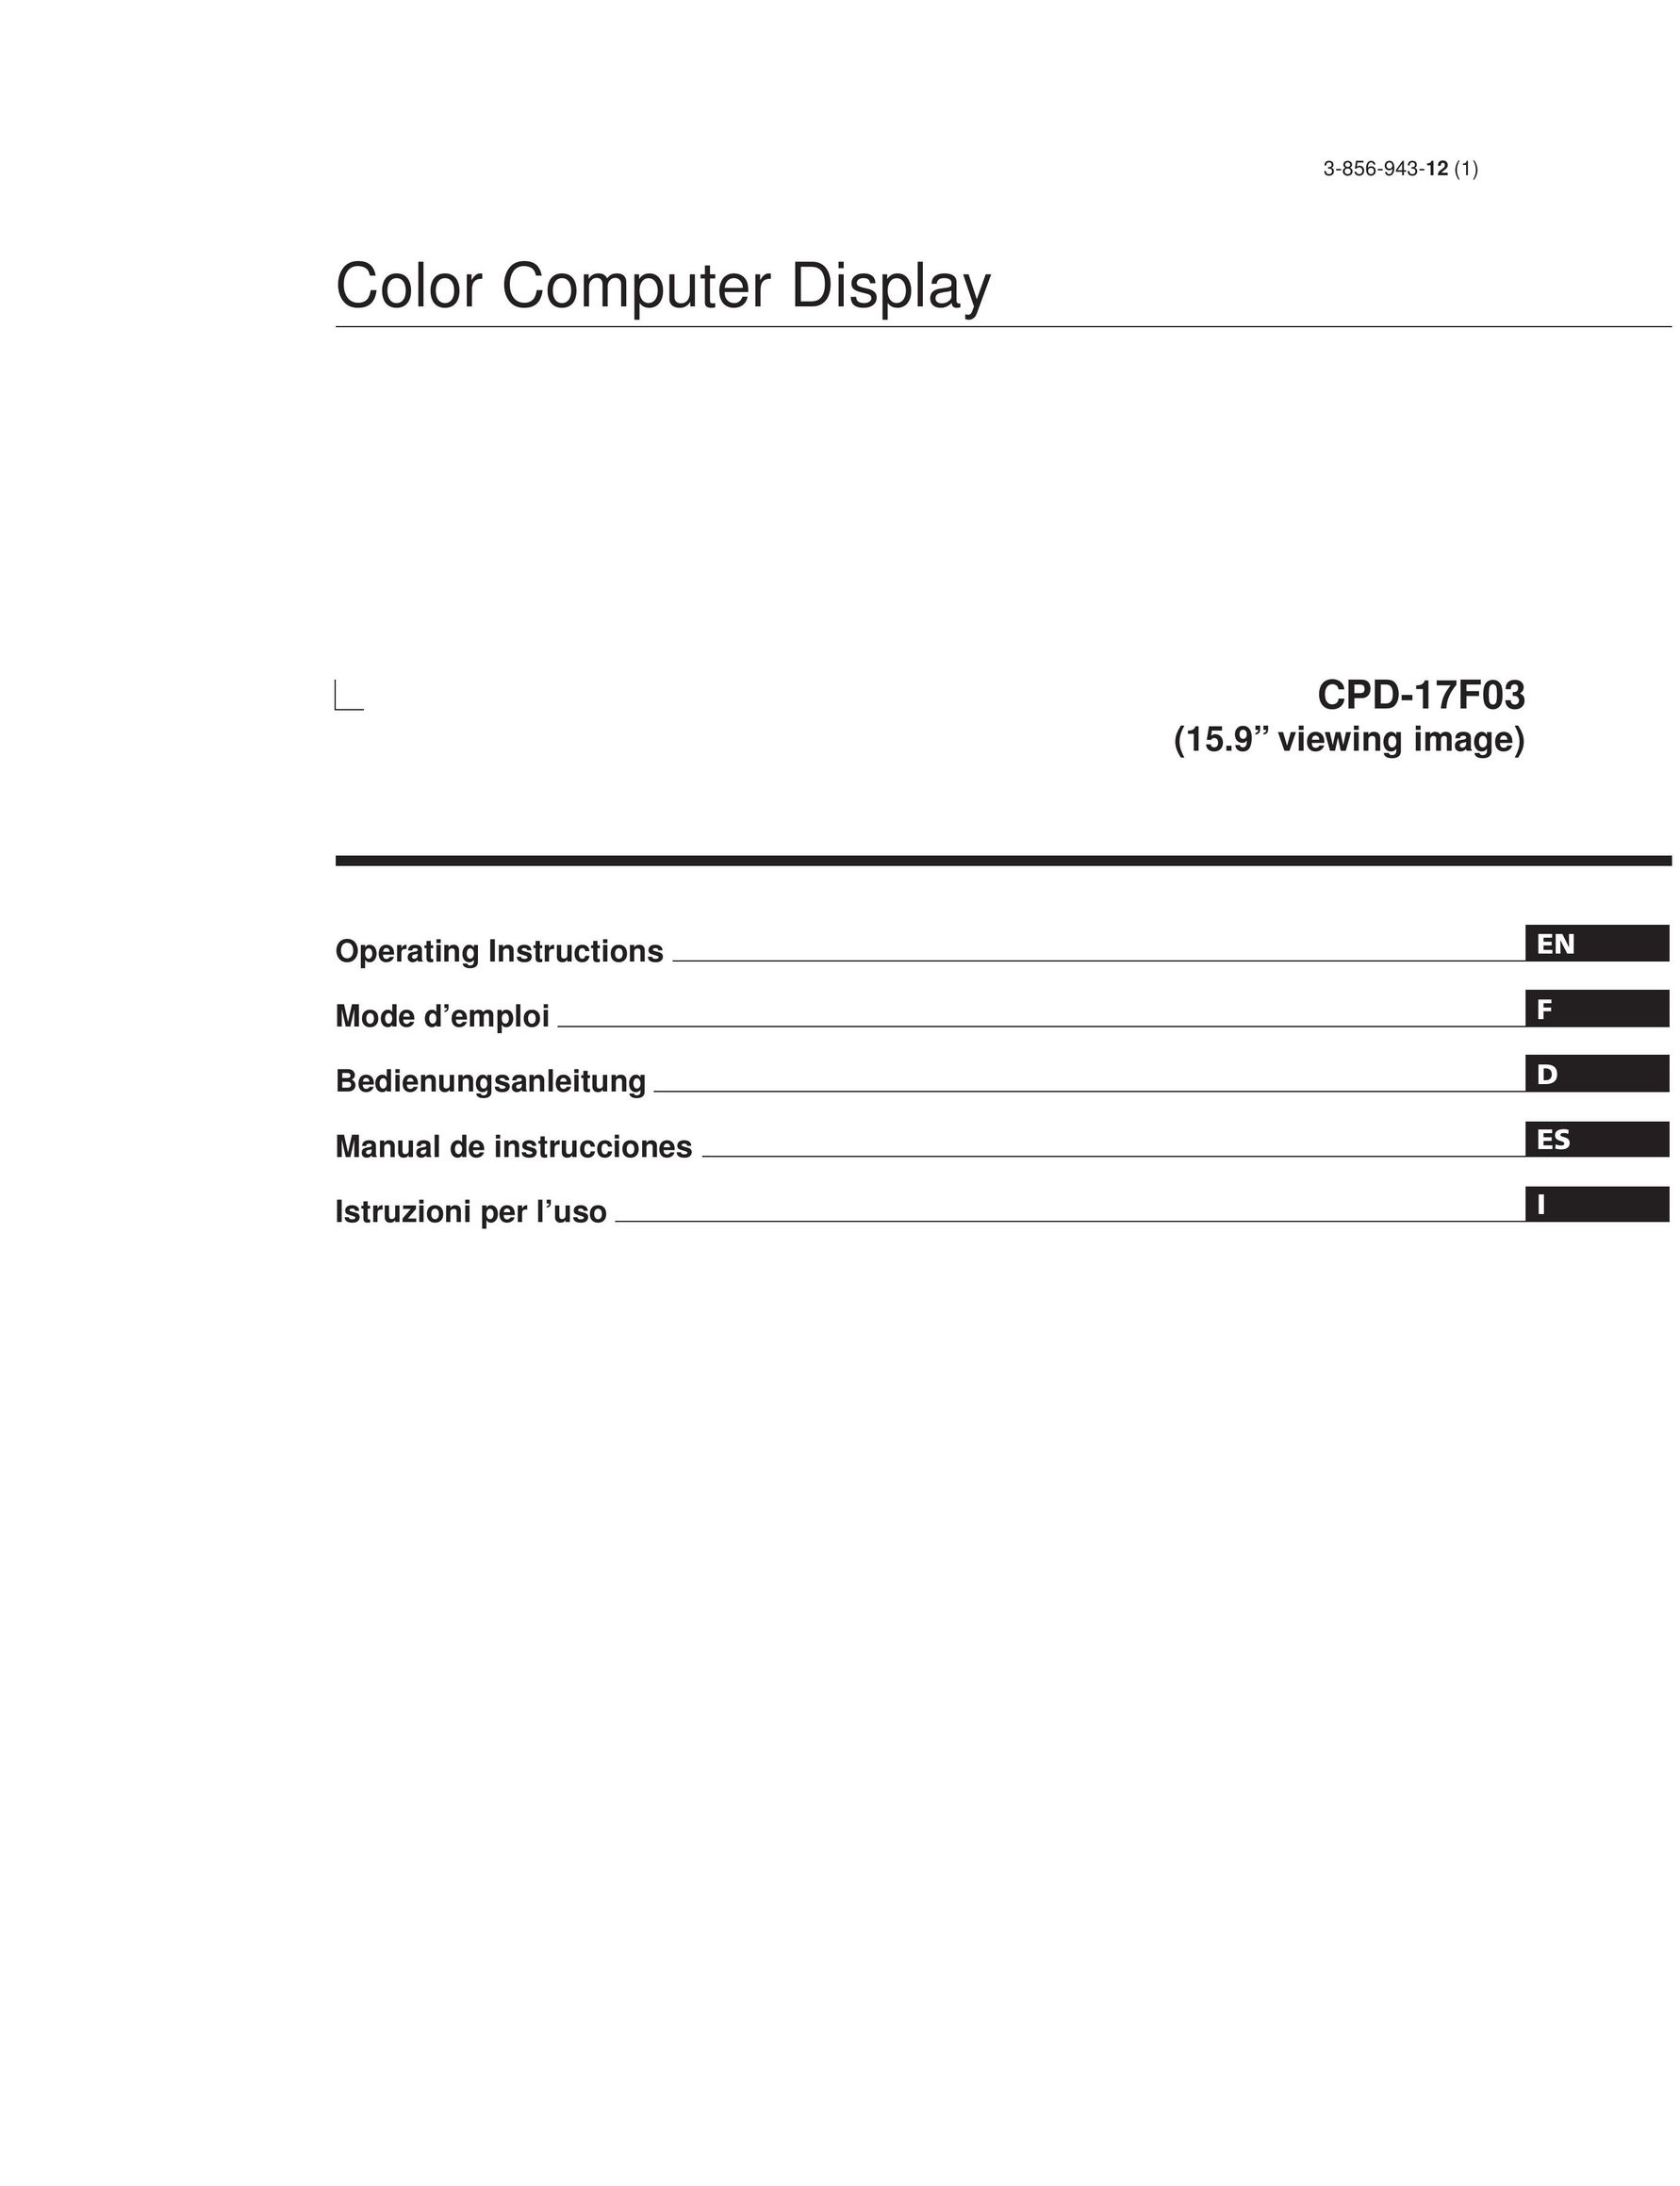 Sony CPD-17F03 Computer Monitor User Manual